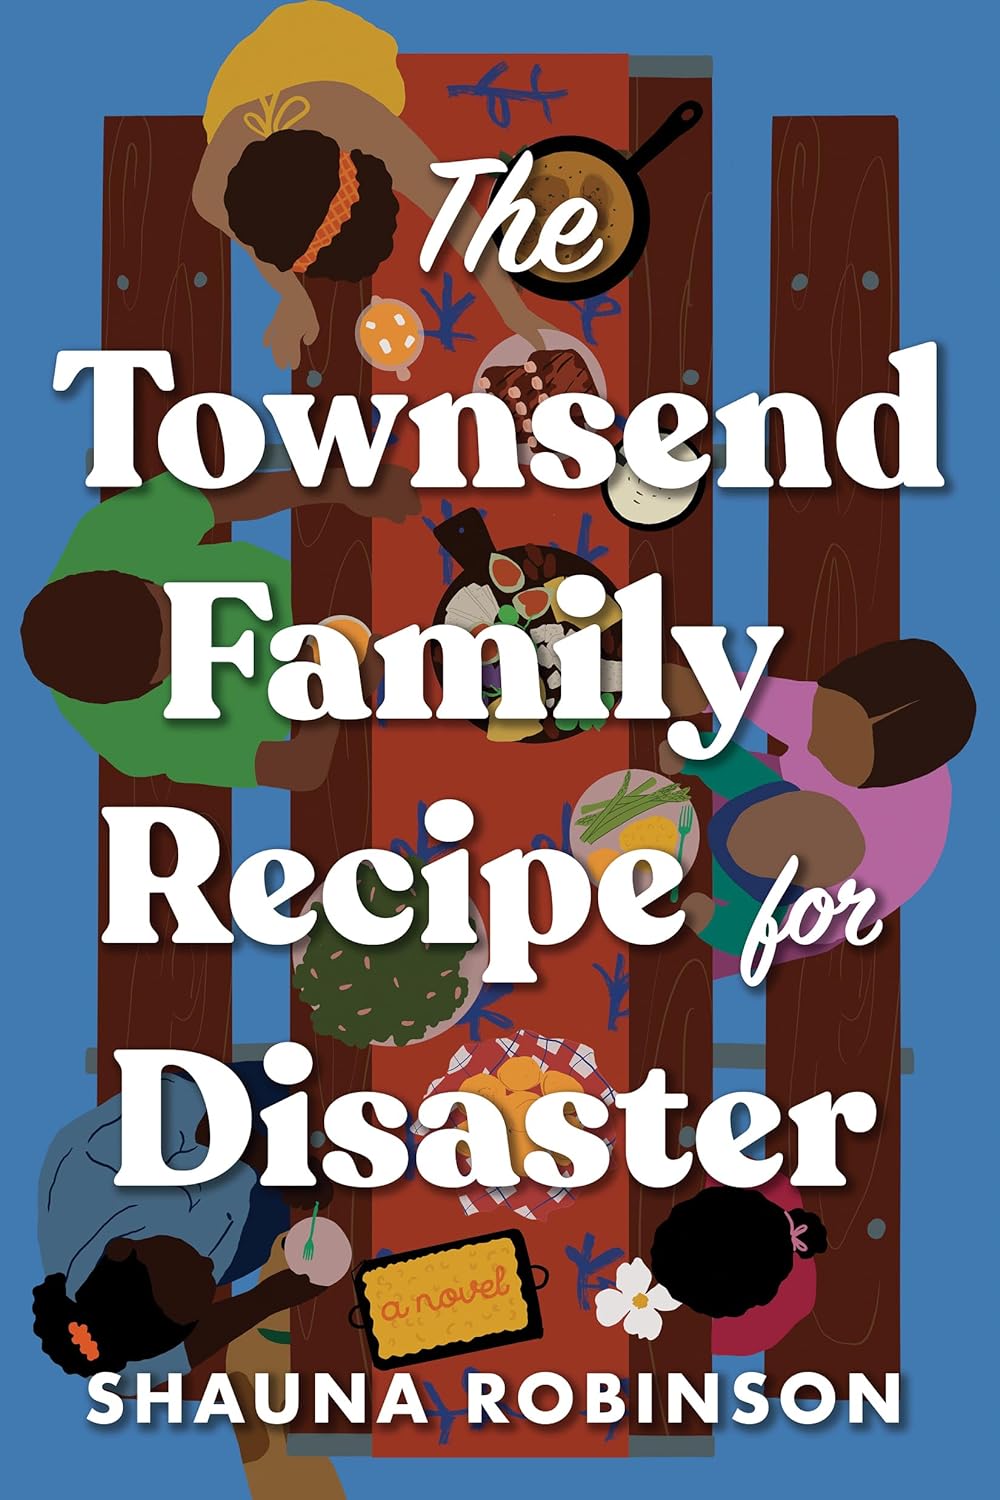 Image for "The Townsend Family Recipe for Disaster"